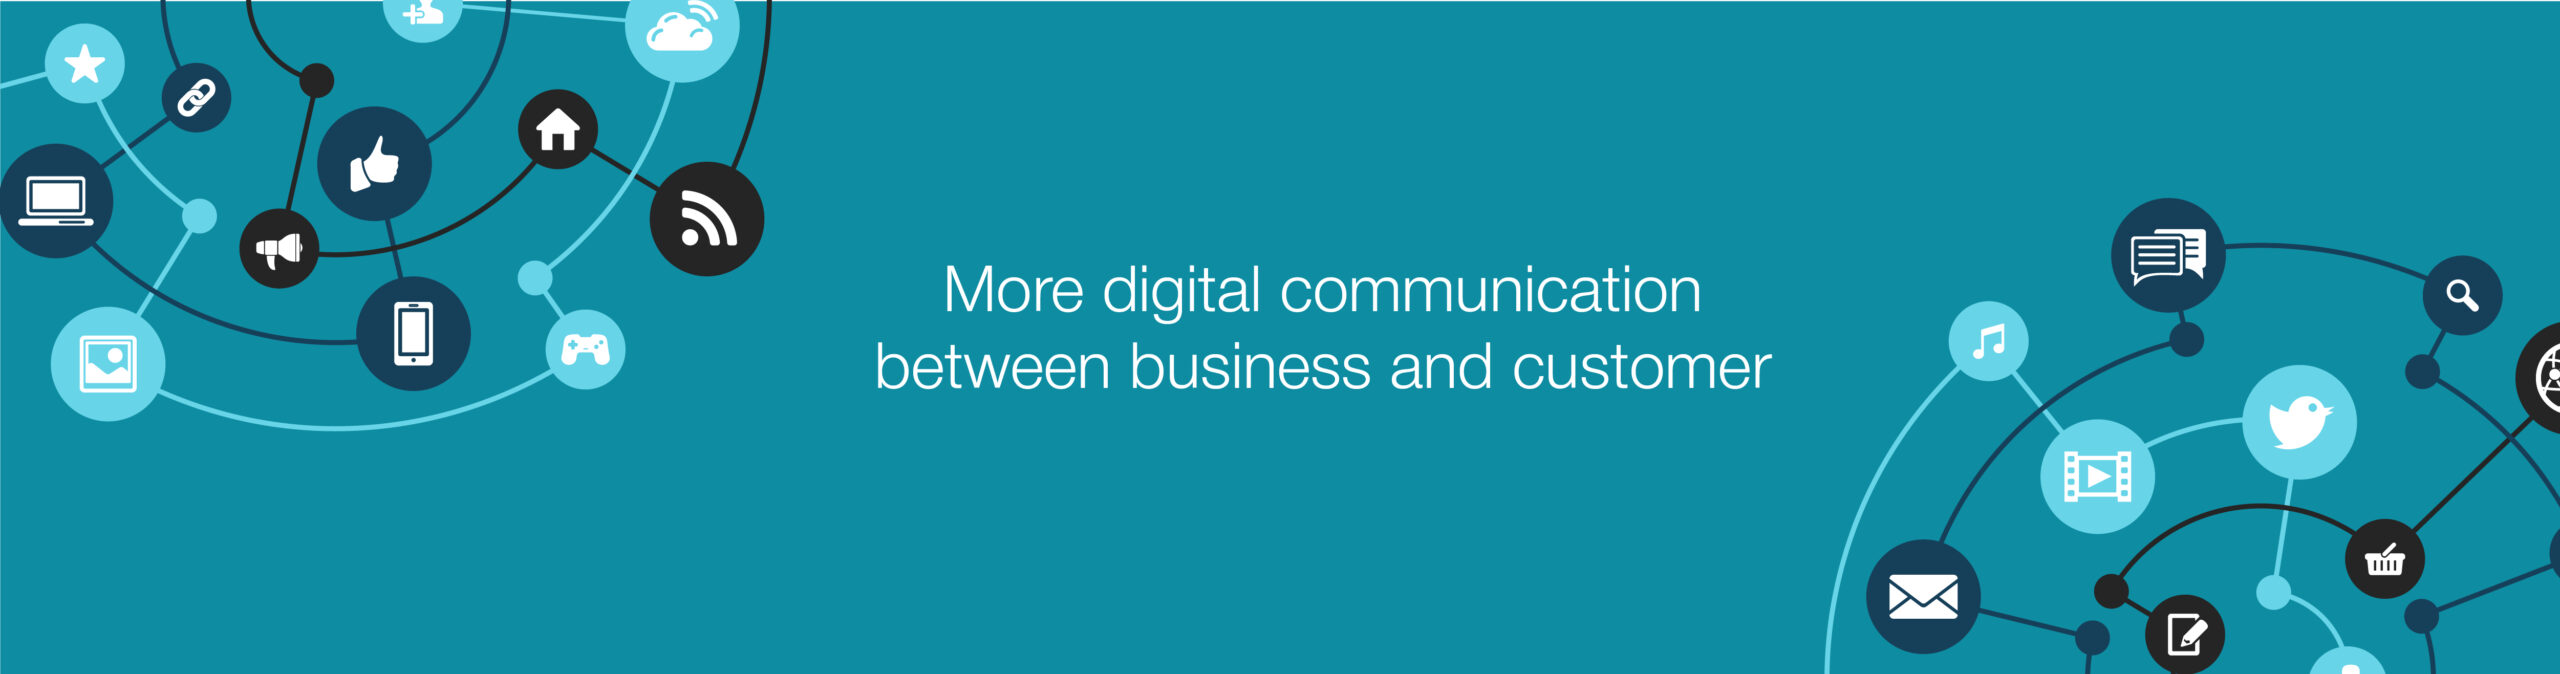 More digital communication between business and customer